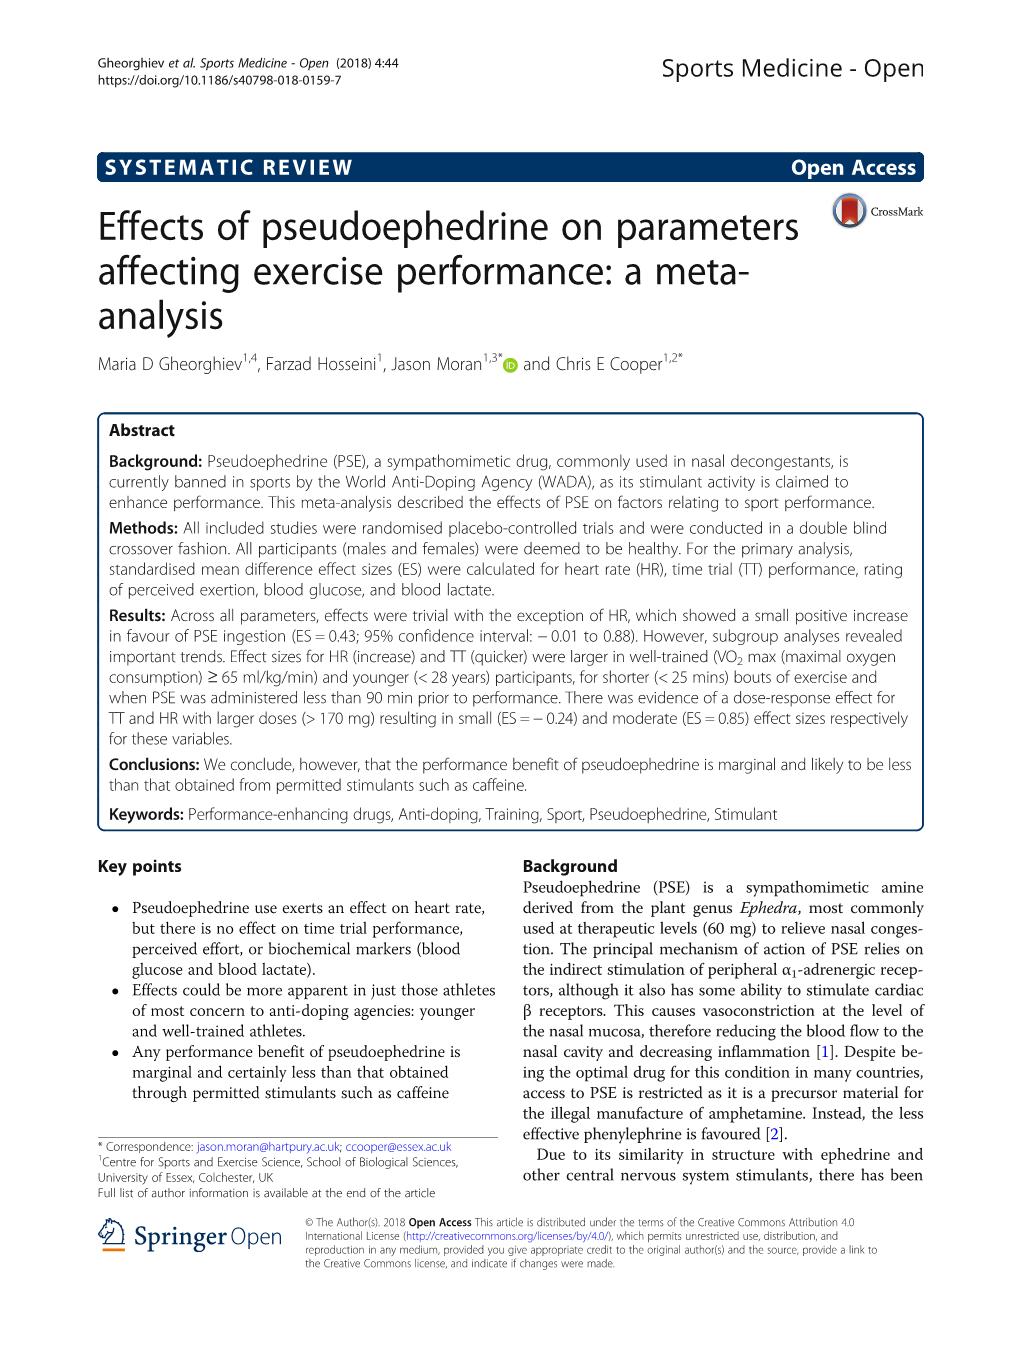 Effects of Pseudoephedrine on Parameters Affecting Exercise Performance: a Meta-Analysis